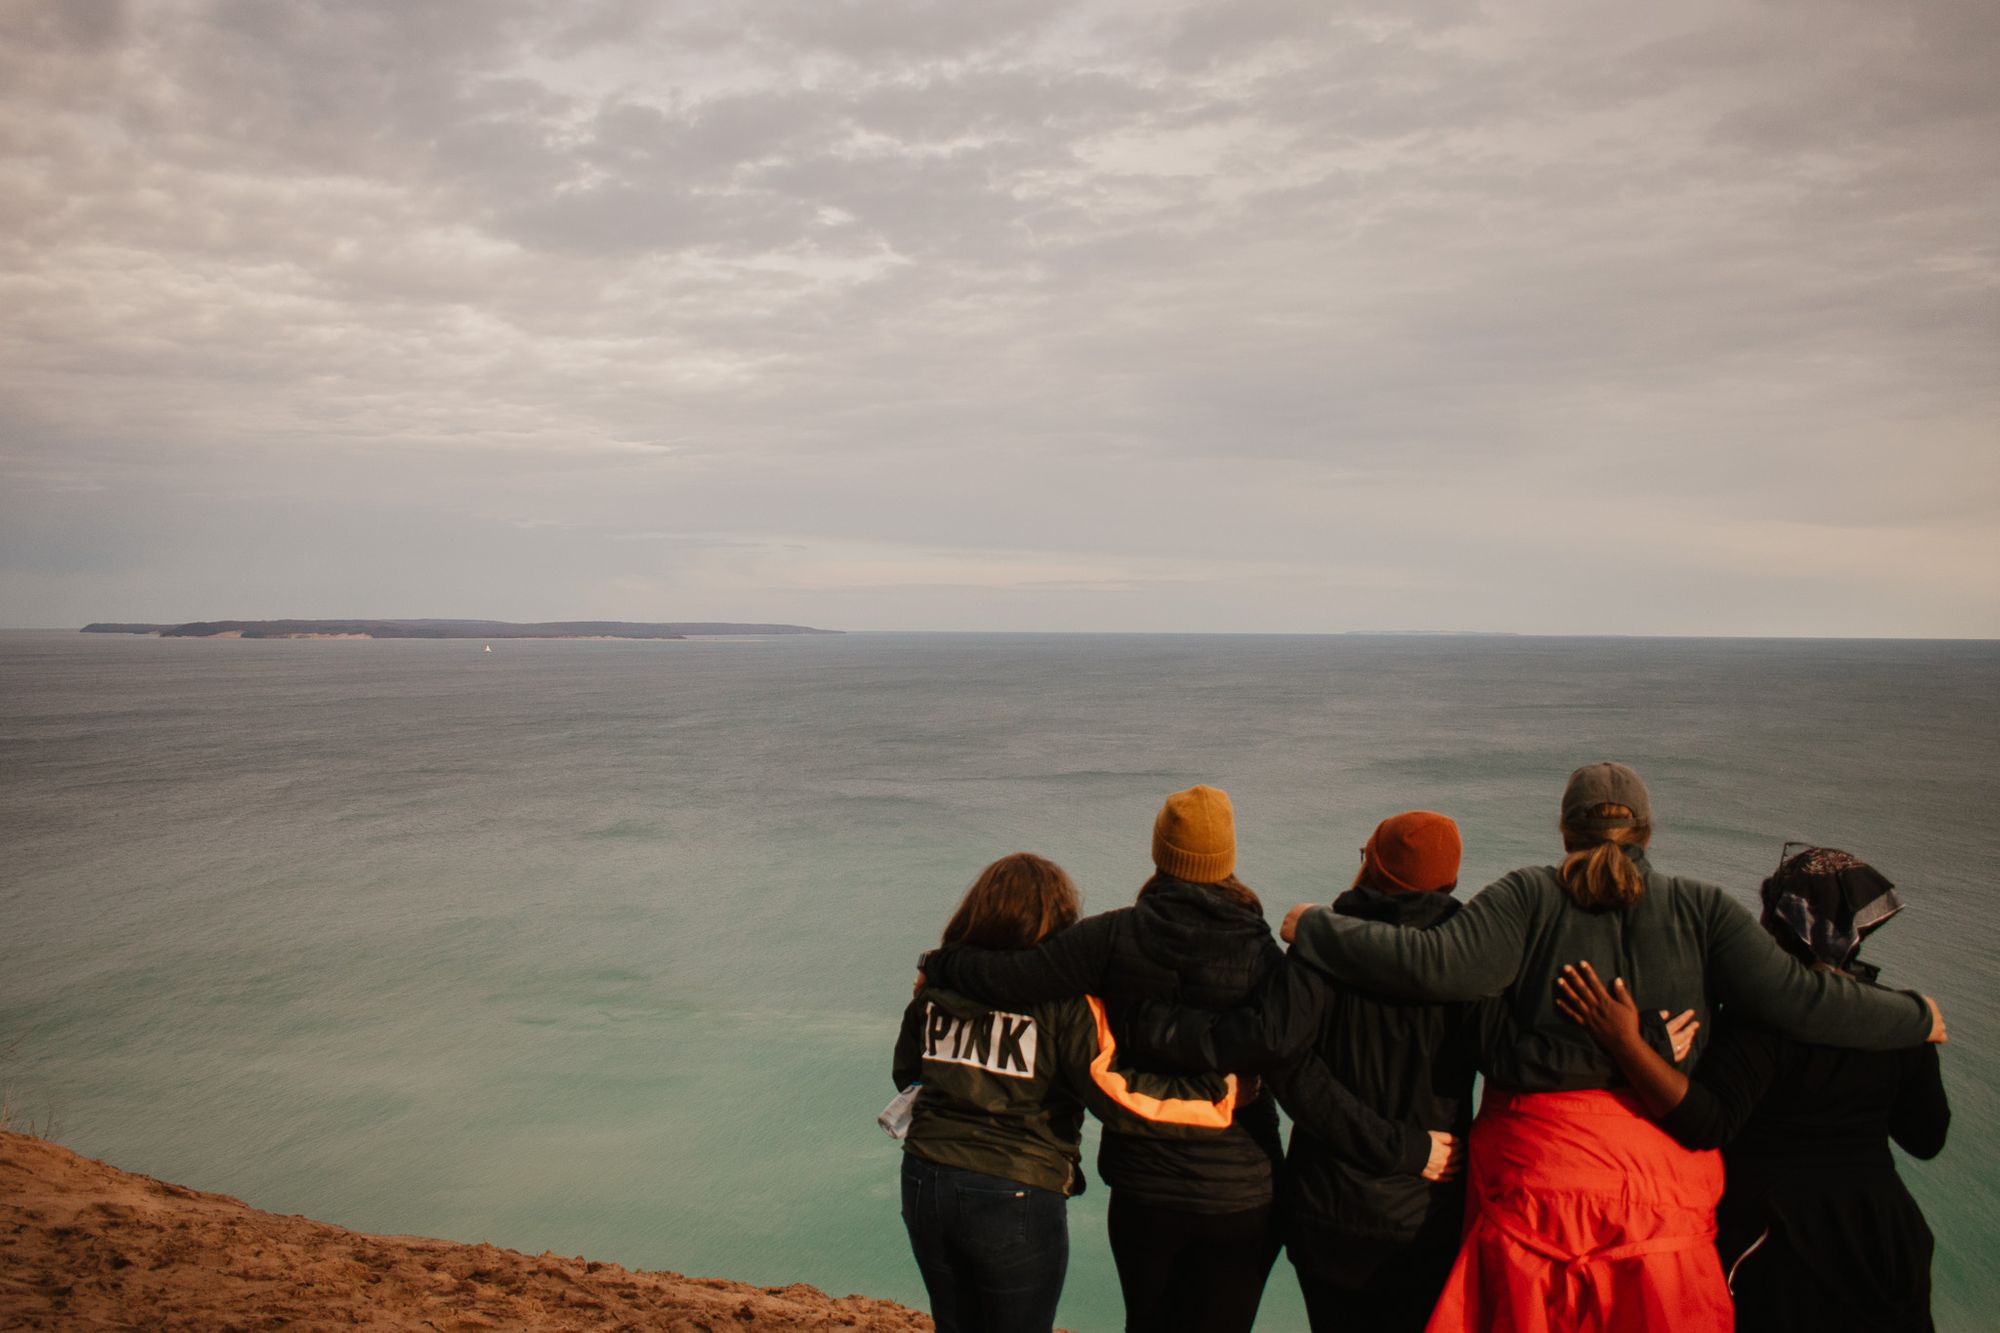 Four women pose in front of the ocean.